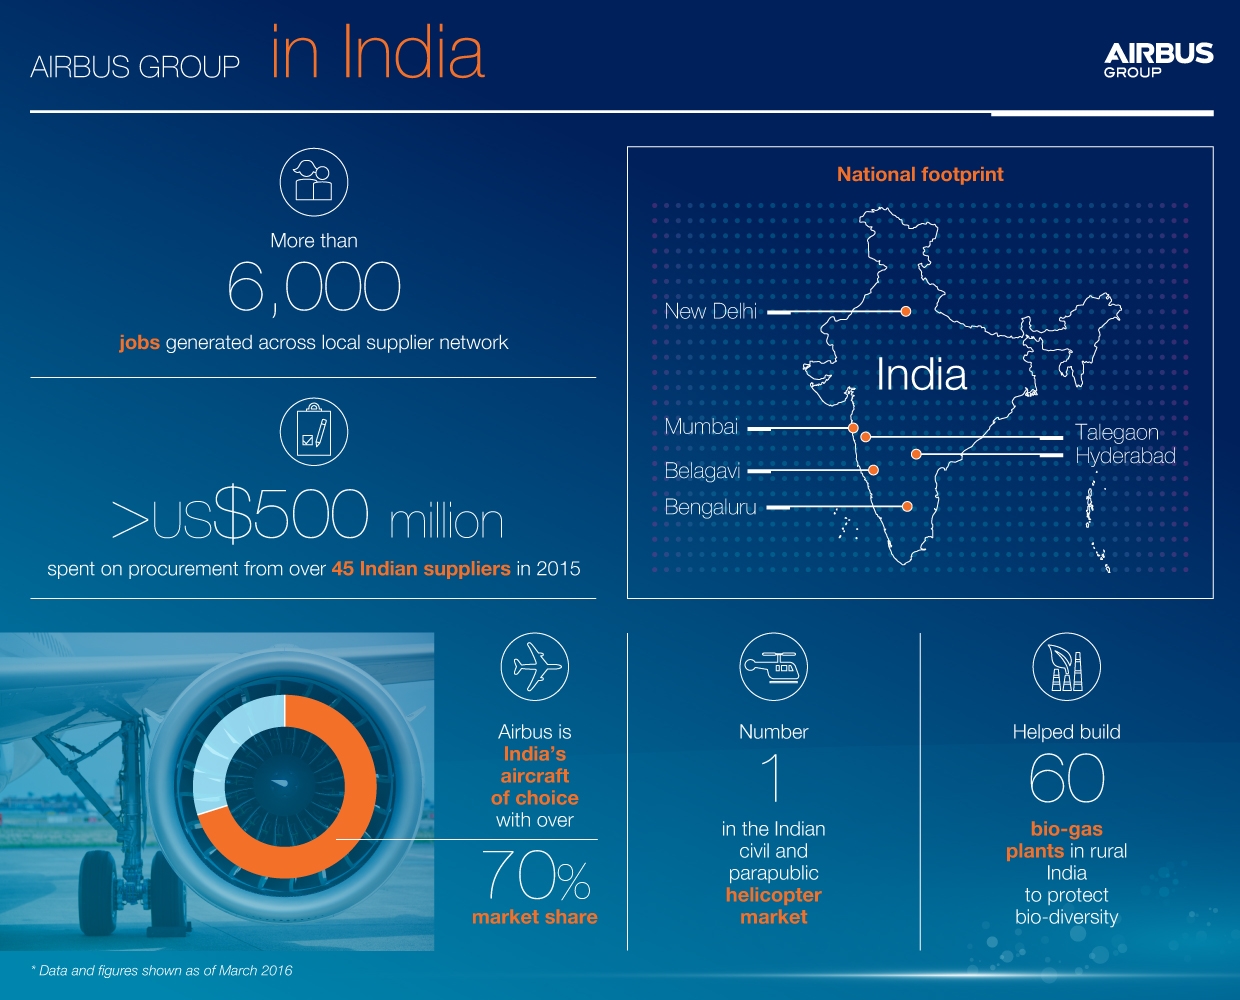 20160425-airbus-group-india-updated-april2016-2016-05-10-10-40-26